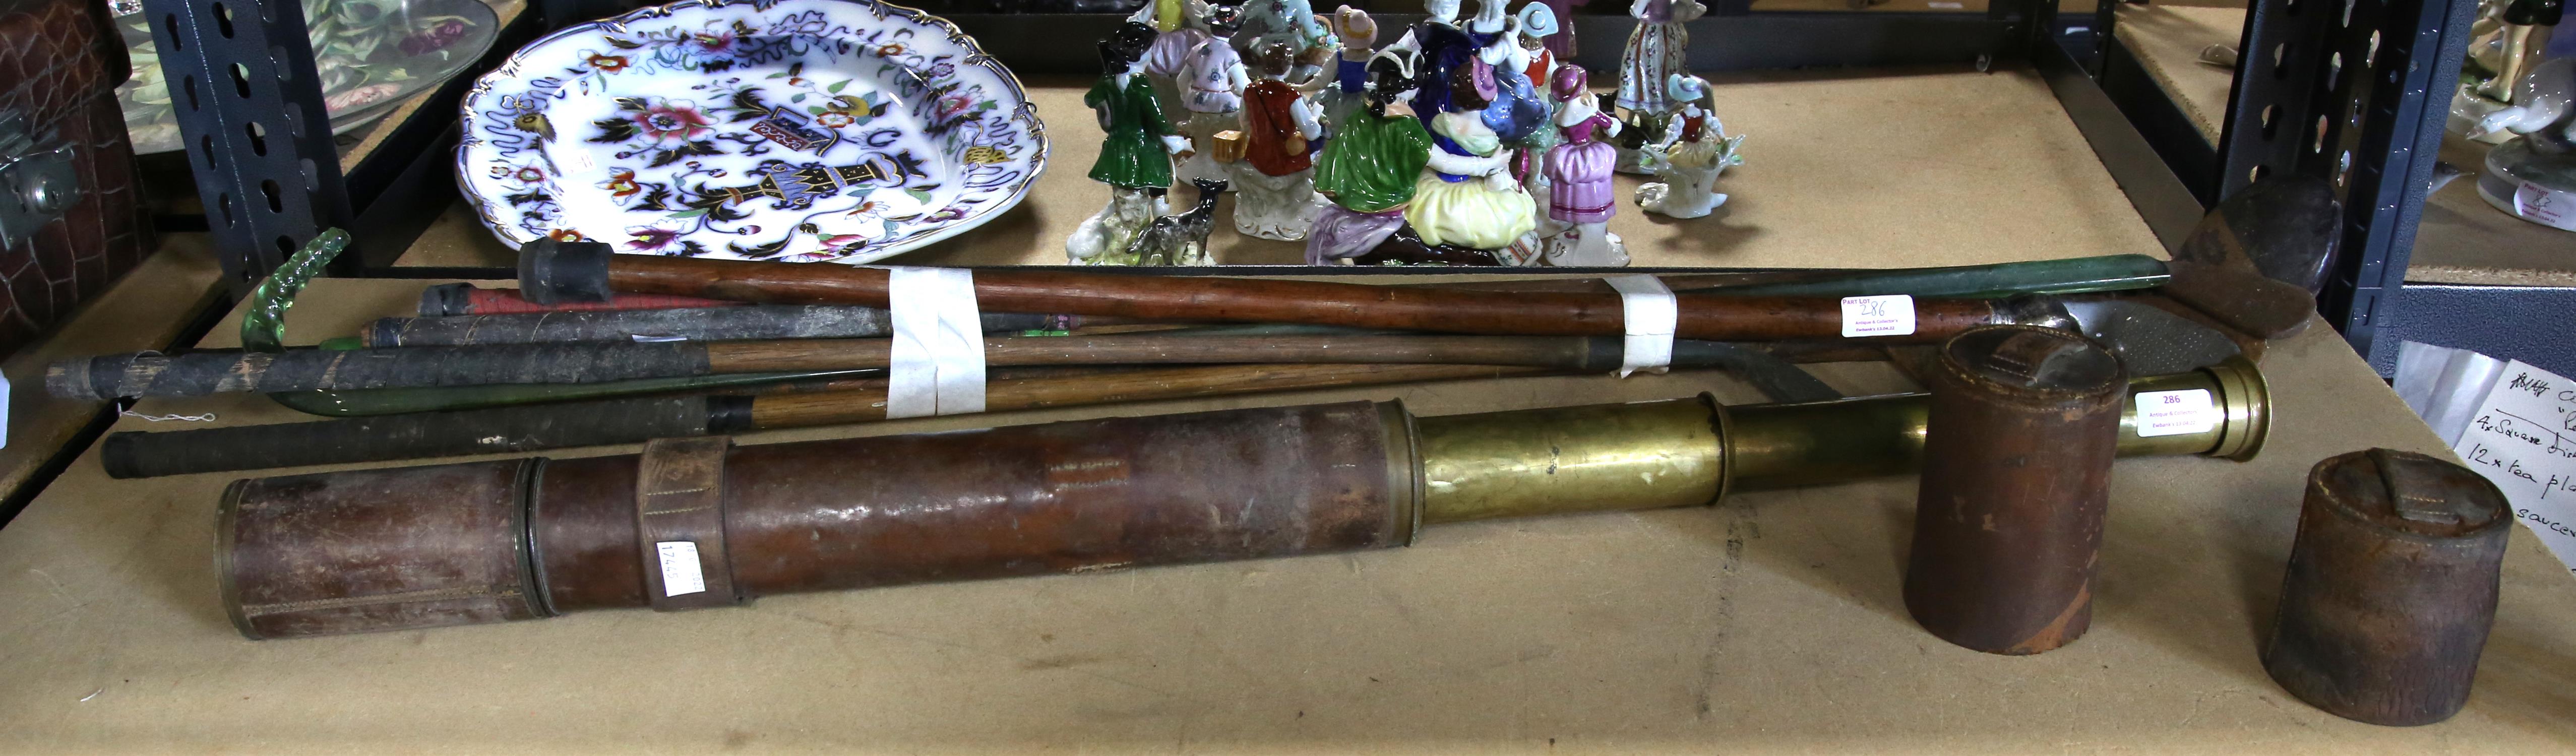 Leather covered brass two draw telescope by W. Watson & Sons, London 1900, 7 cm diameter (lens